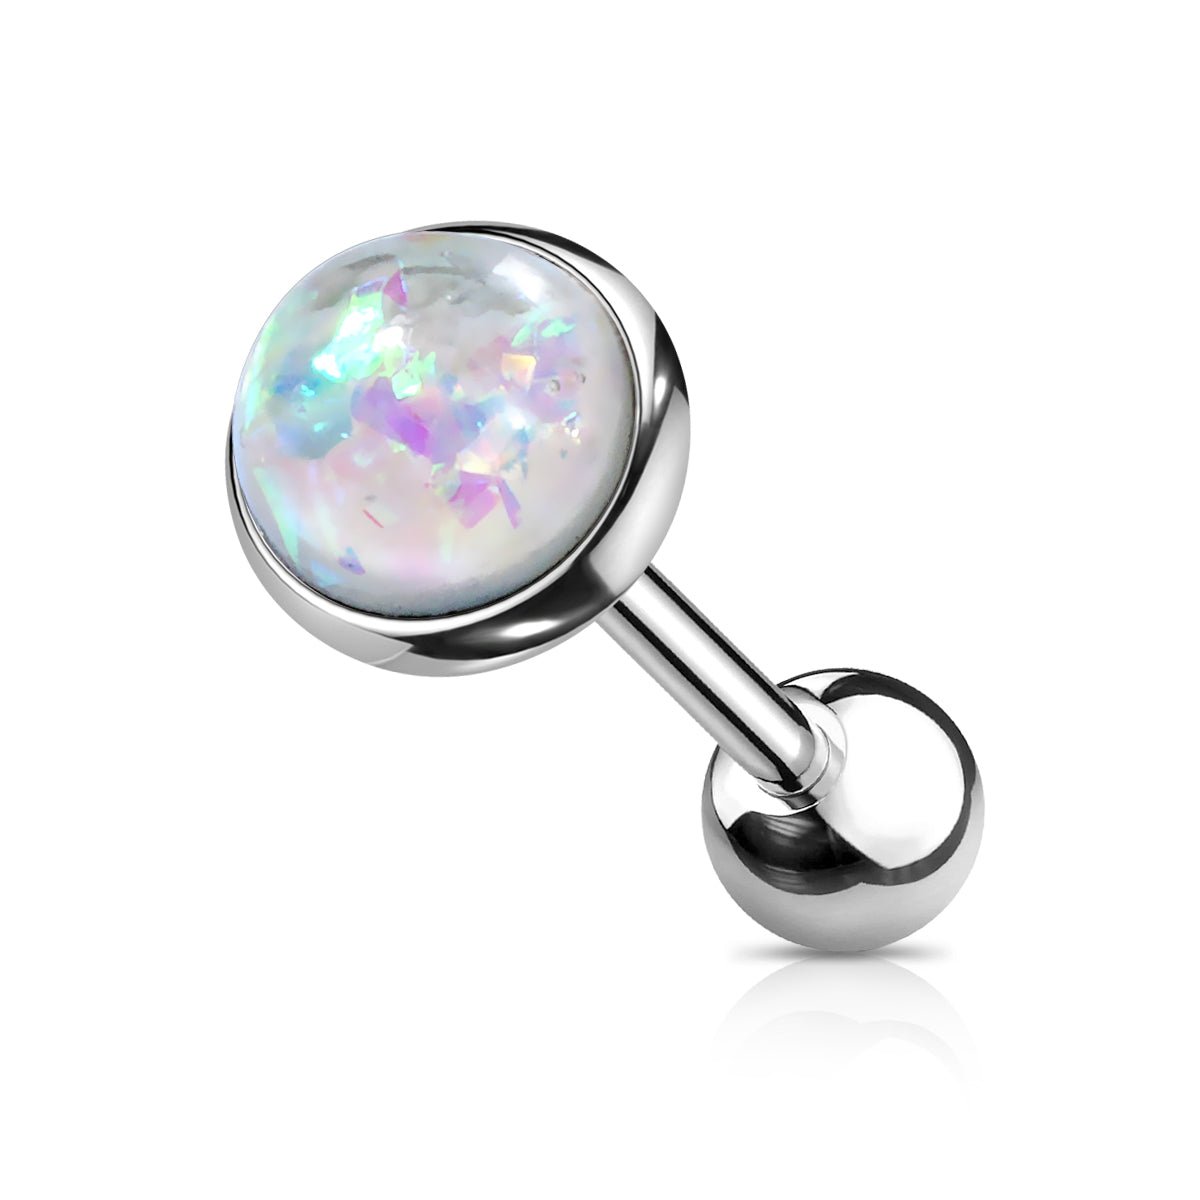 Opal stone ear piercing - Dr. Piercing Aftercare